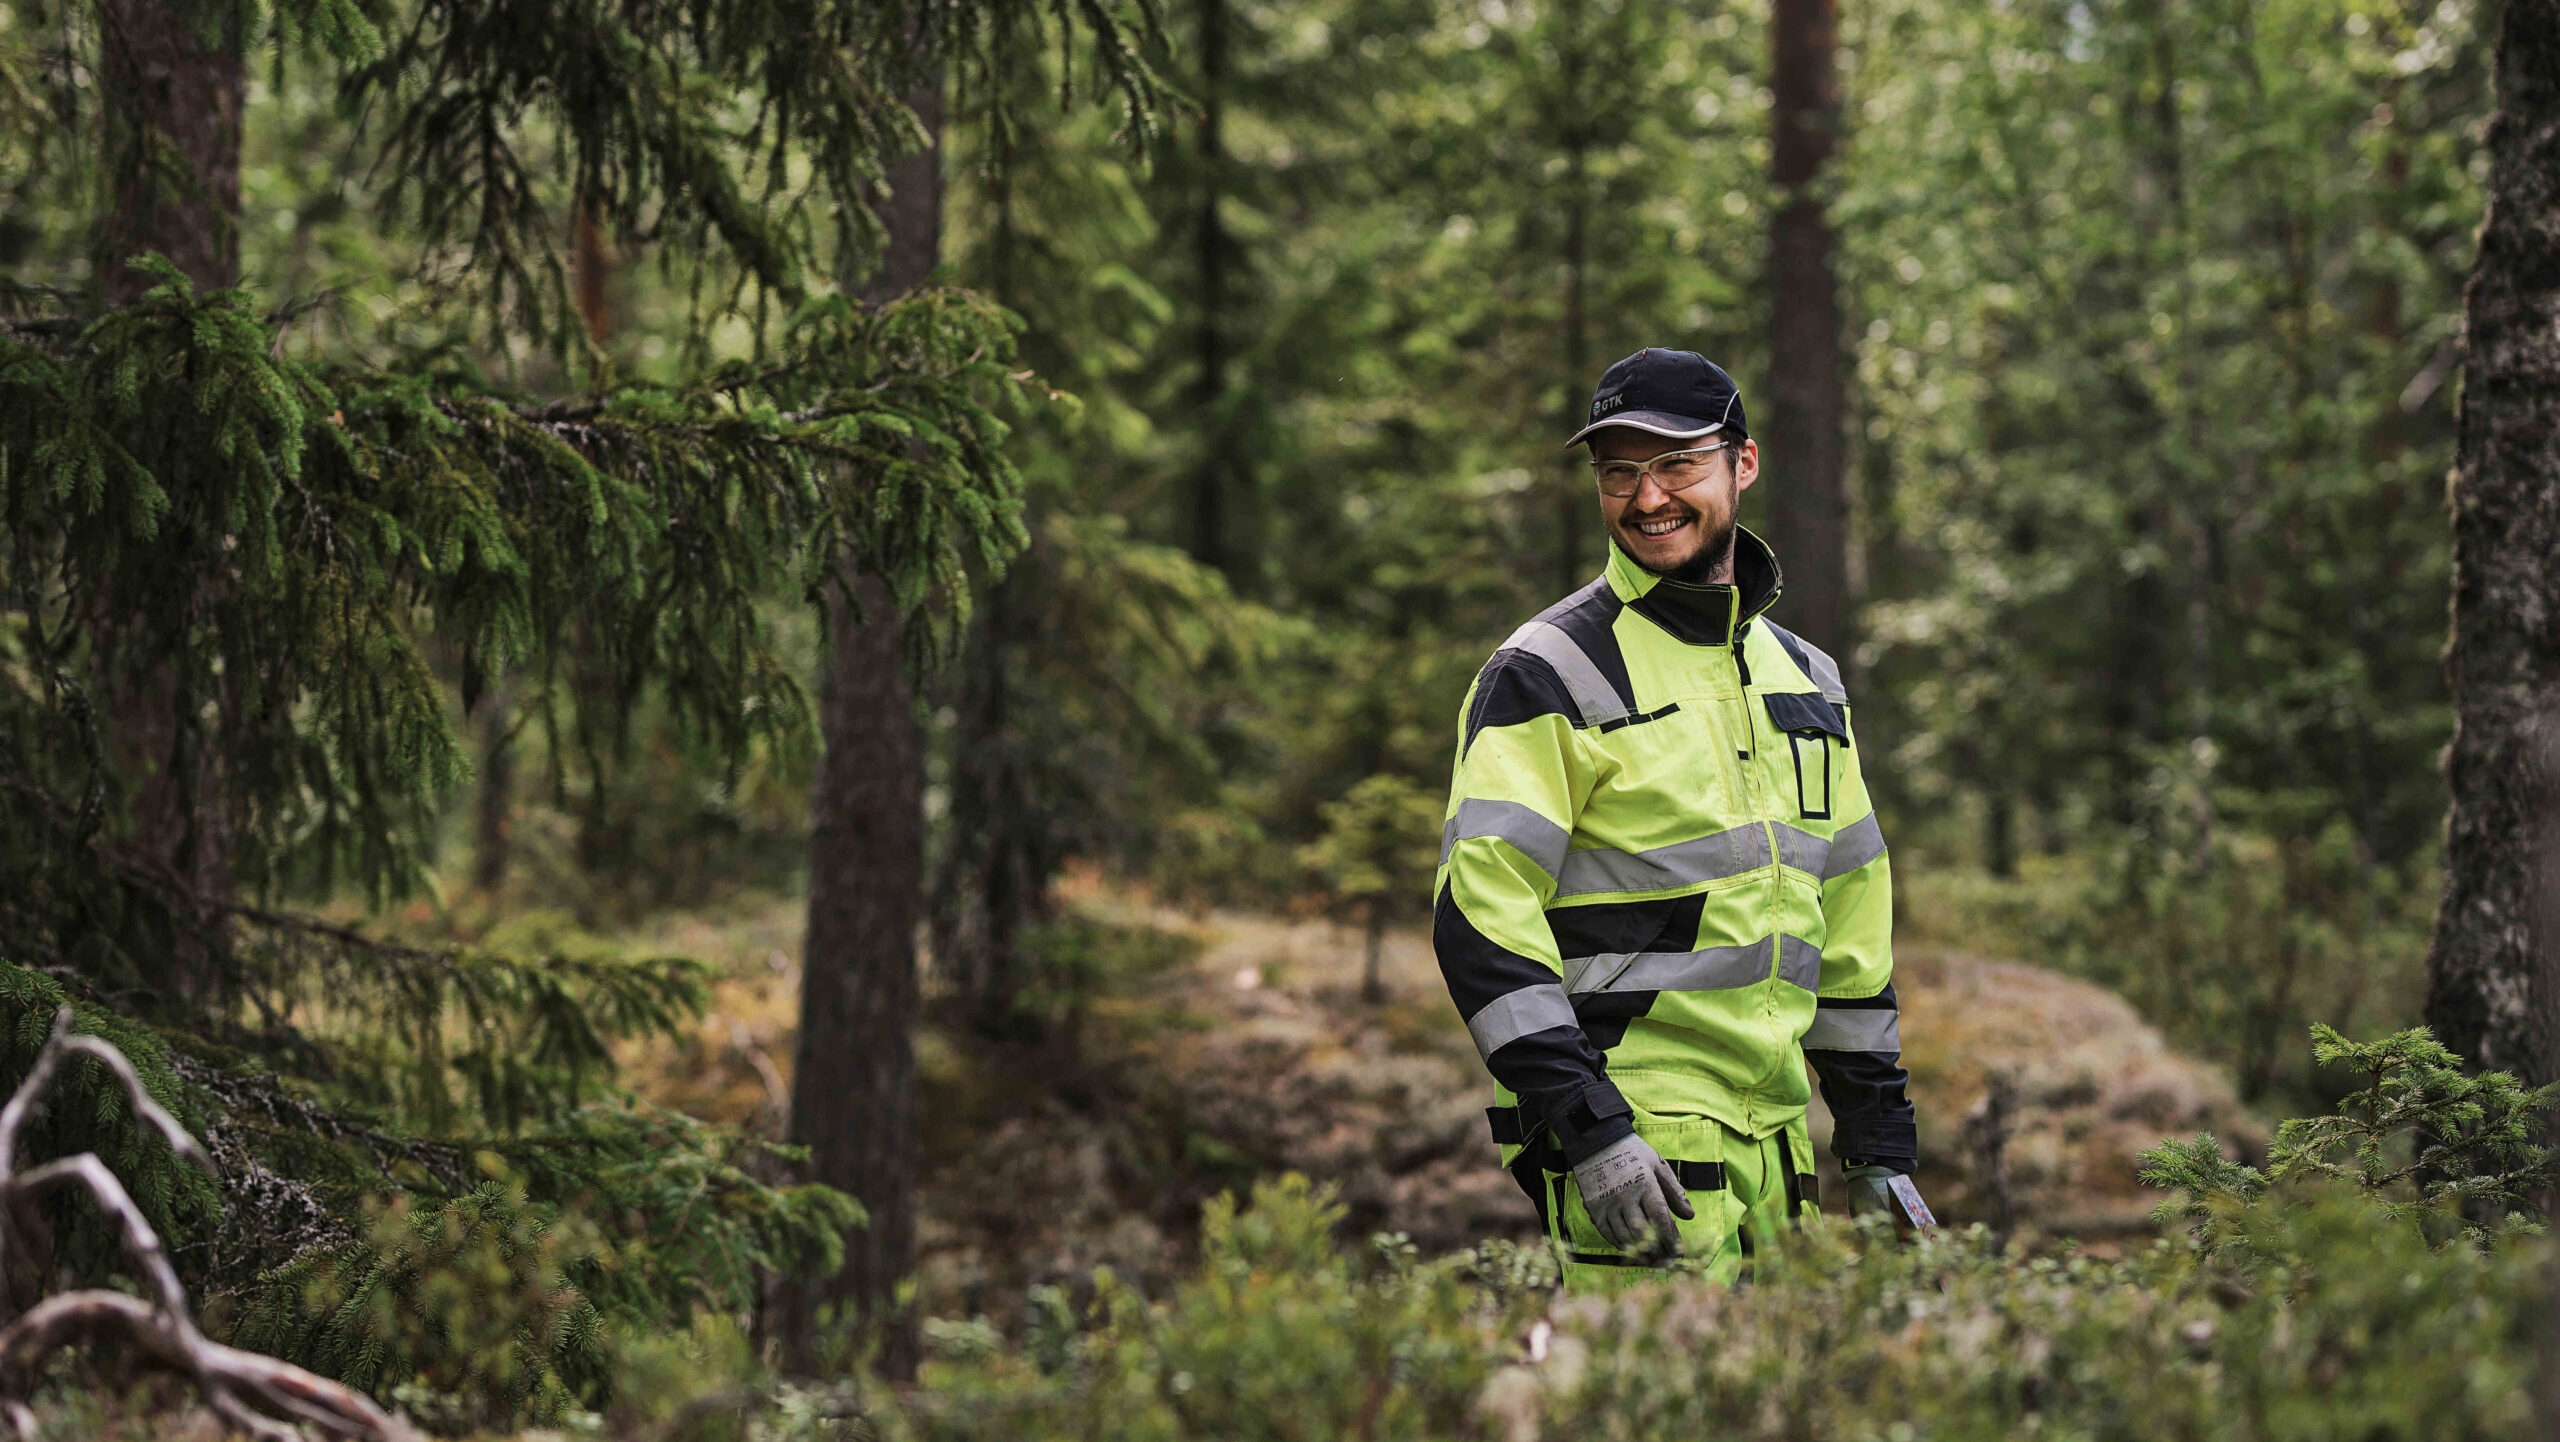 A smiling man in a forest wearing yellow protective gear